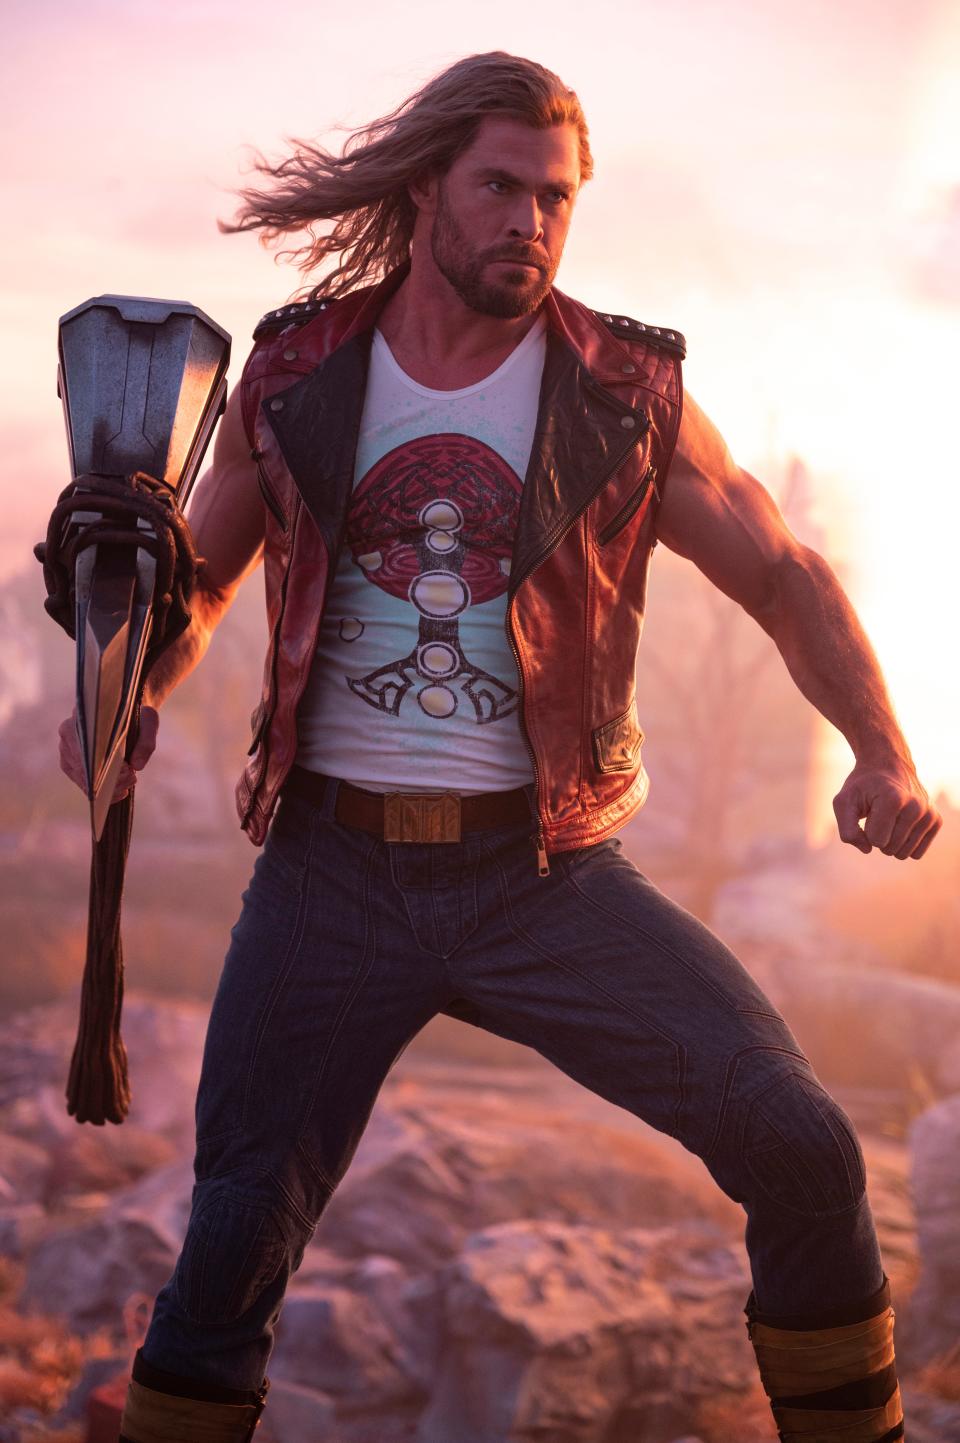 Chris Hemsworth with his three weapons (two arms, one axe) in "Thor: Love and Thunder."